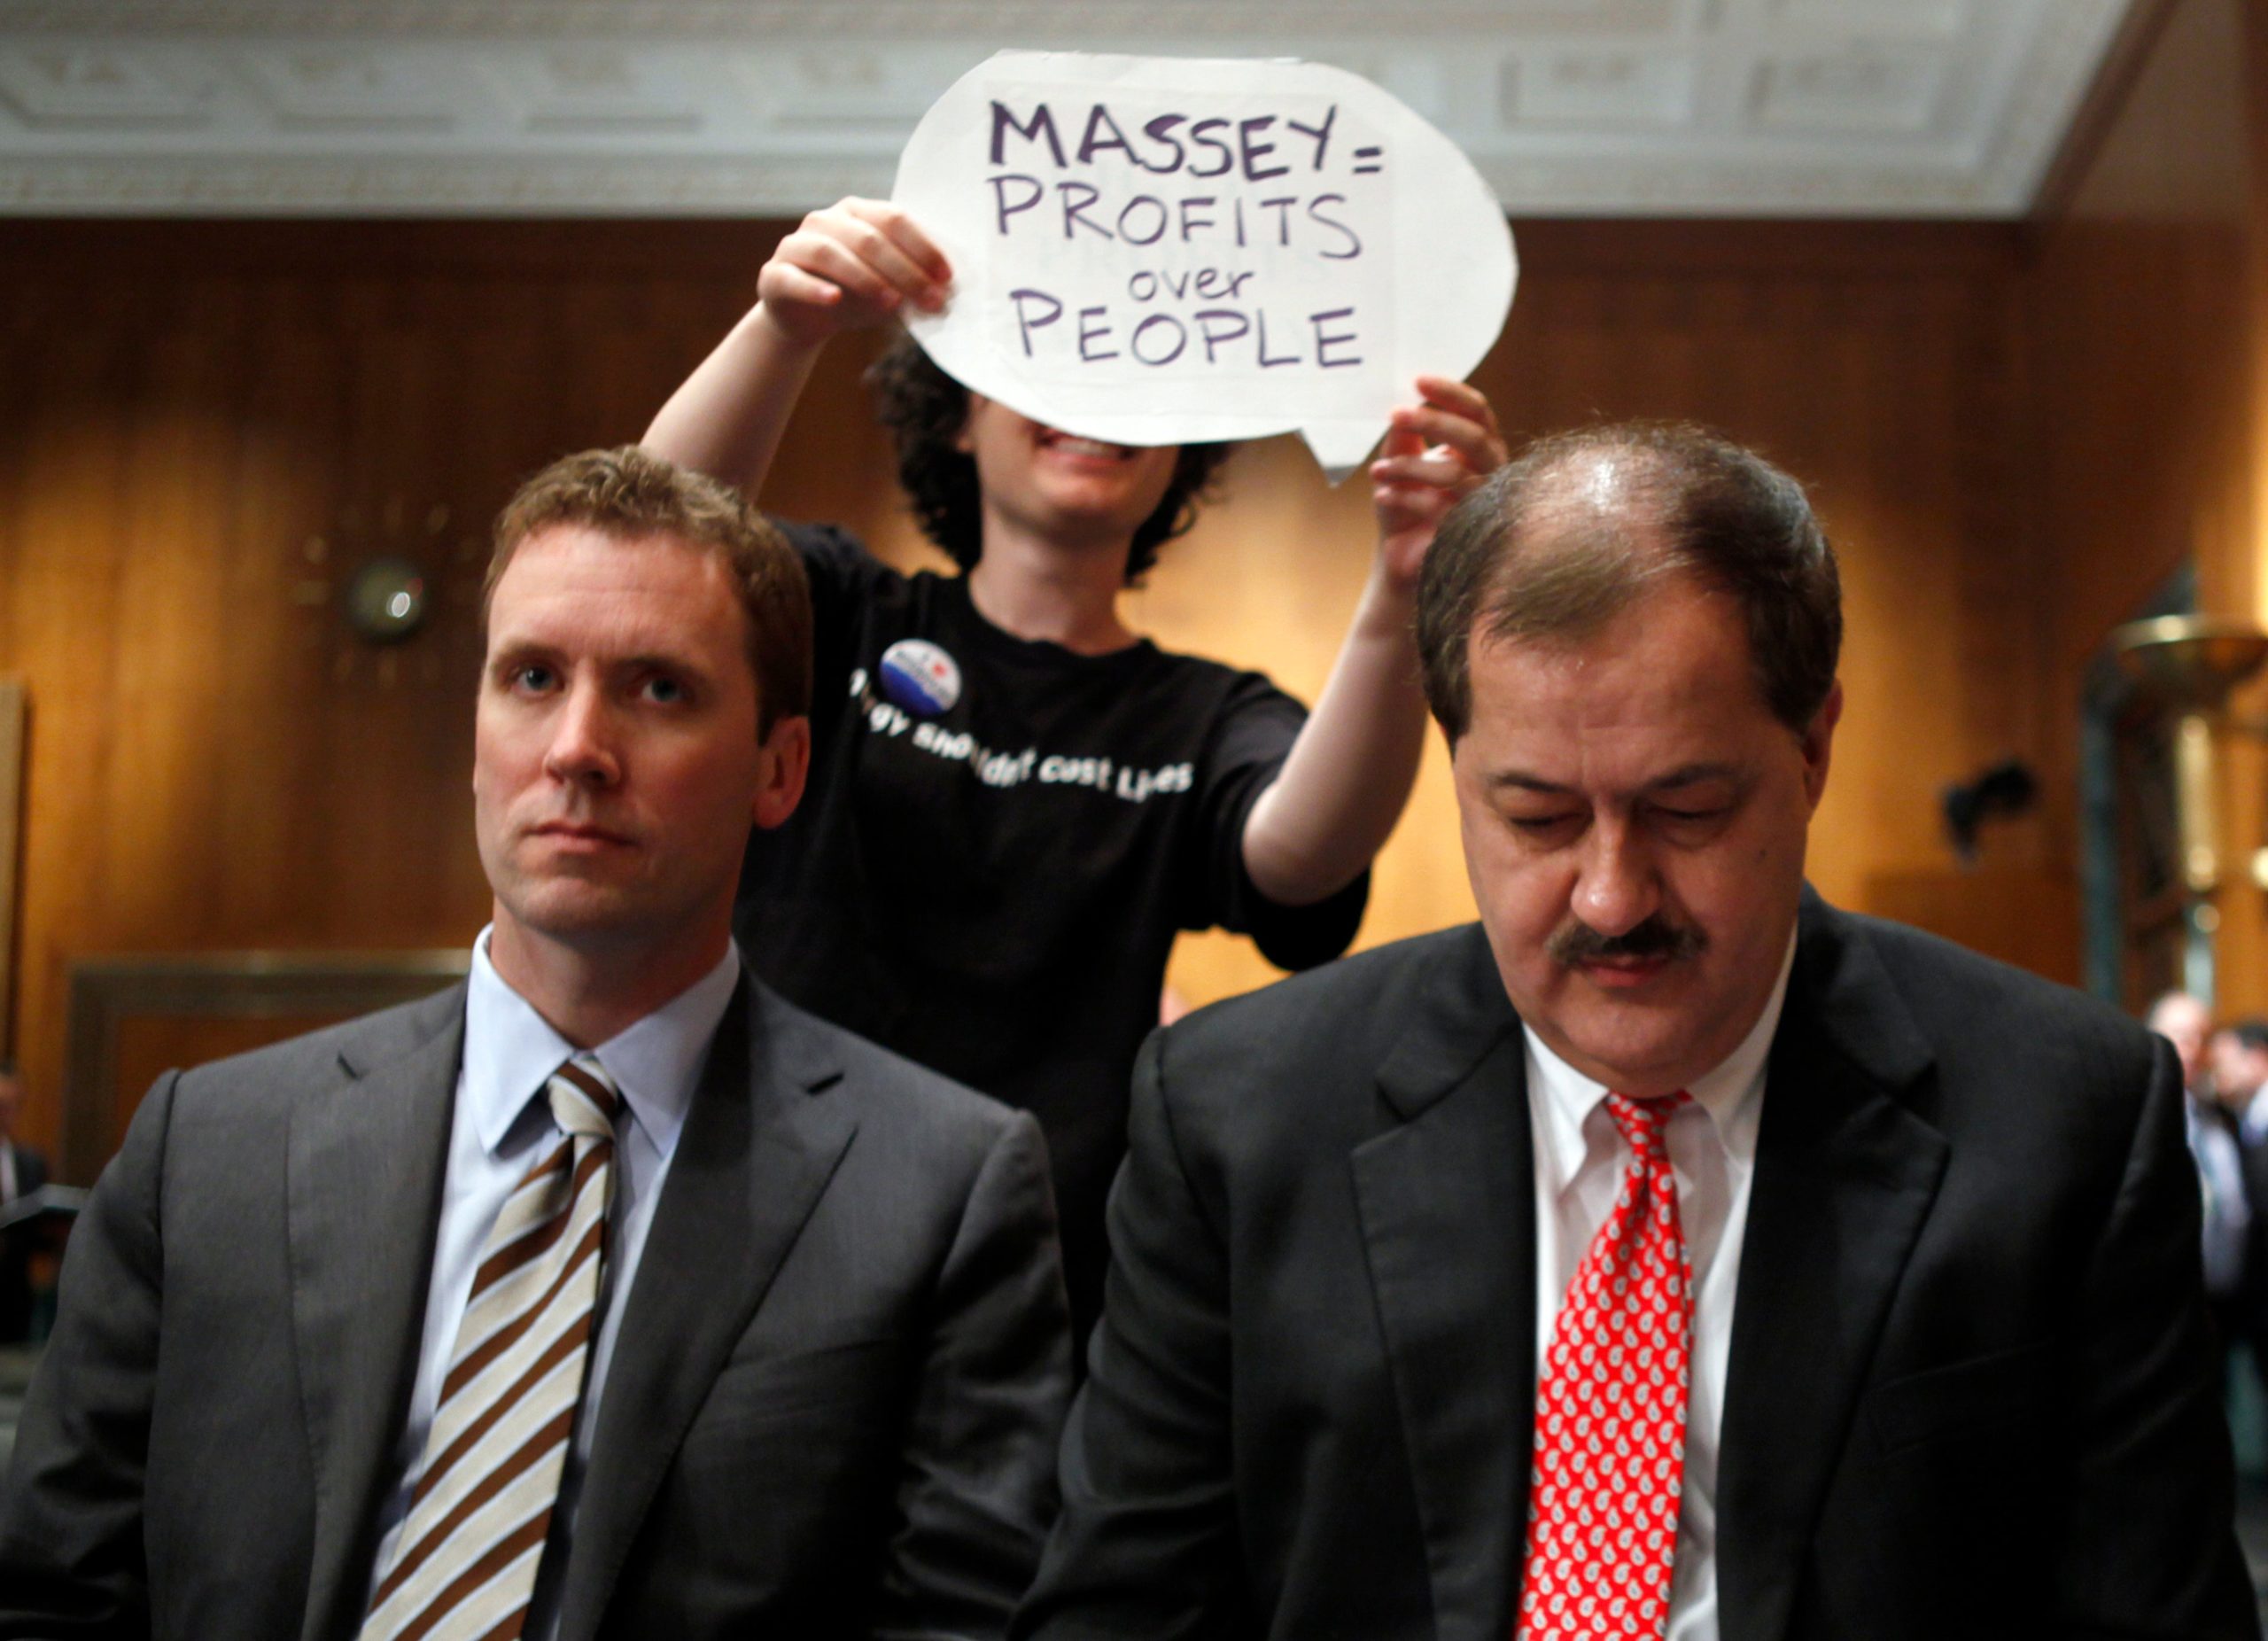 A protester holds a sign behind Vice President of Massey Energy Company and general council Shane Harvey, left, and Massey Energy Company Chief Executive Officer Don Blankenship as they wait to testify on Capitol Hill in Washington, Thursday, May 20, 2010. (Photo: Carolyn Kaster, AP)